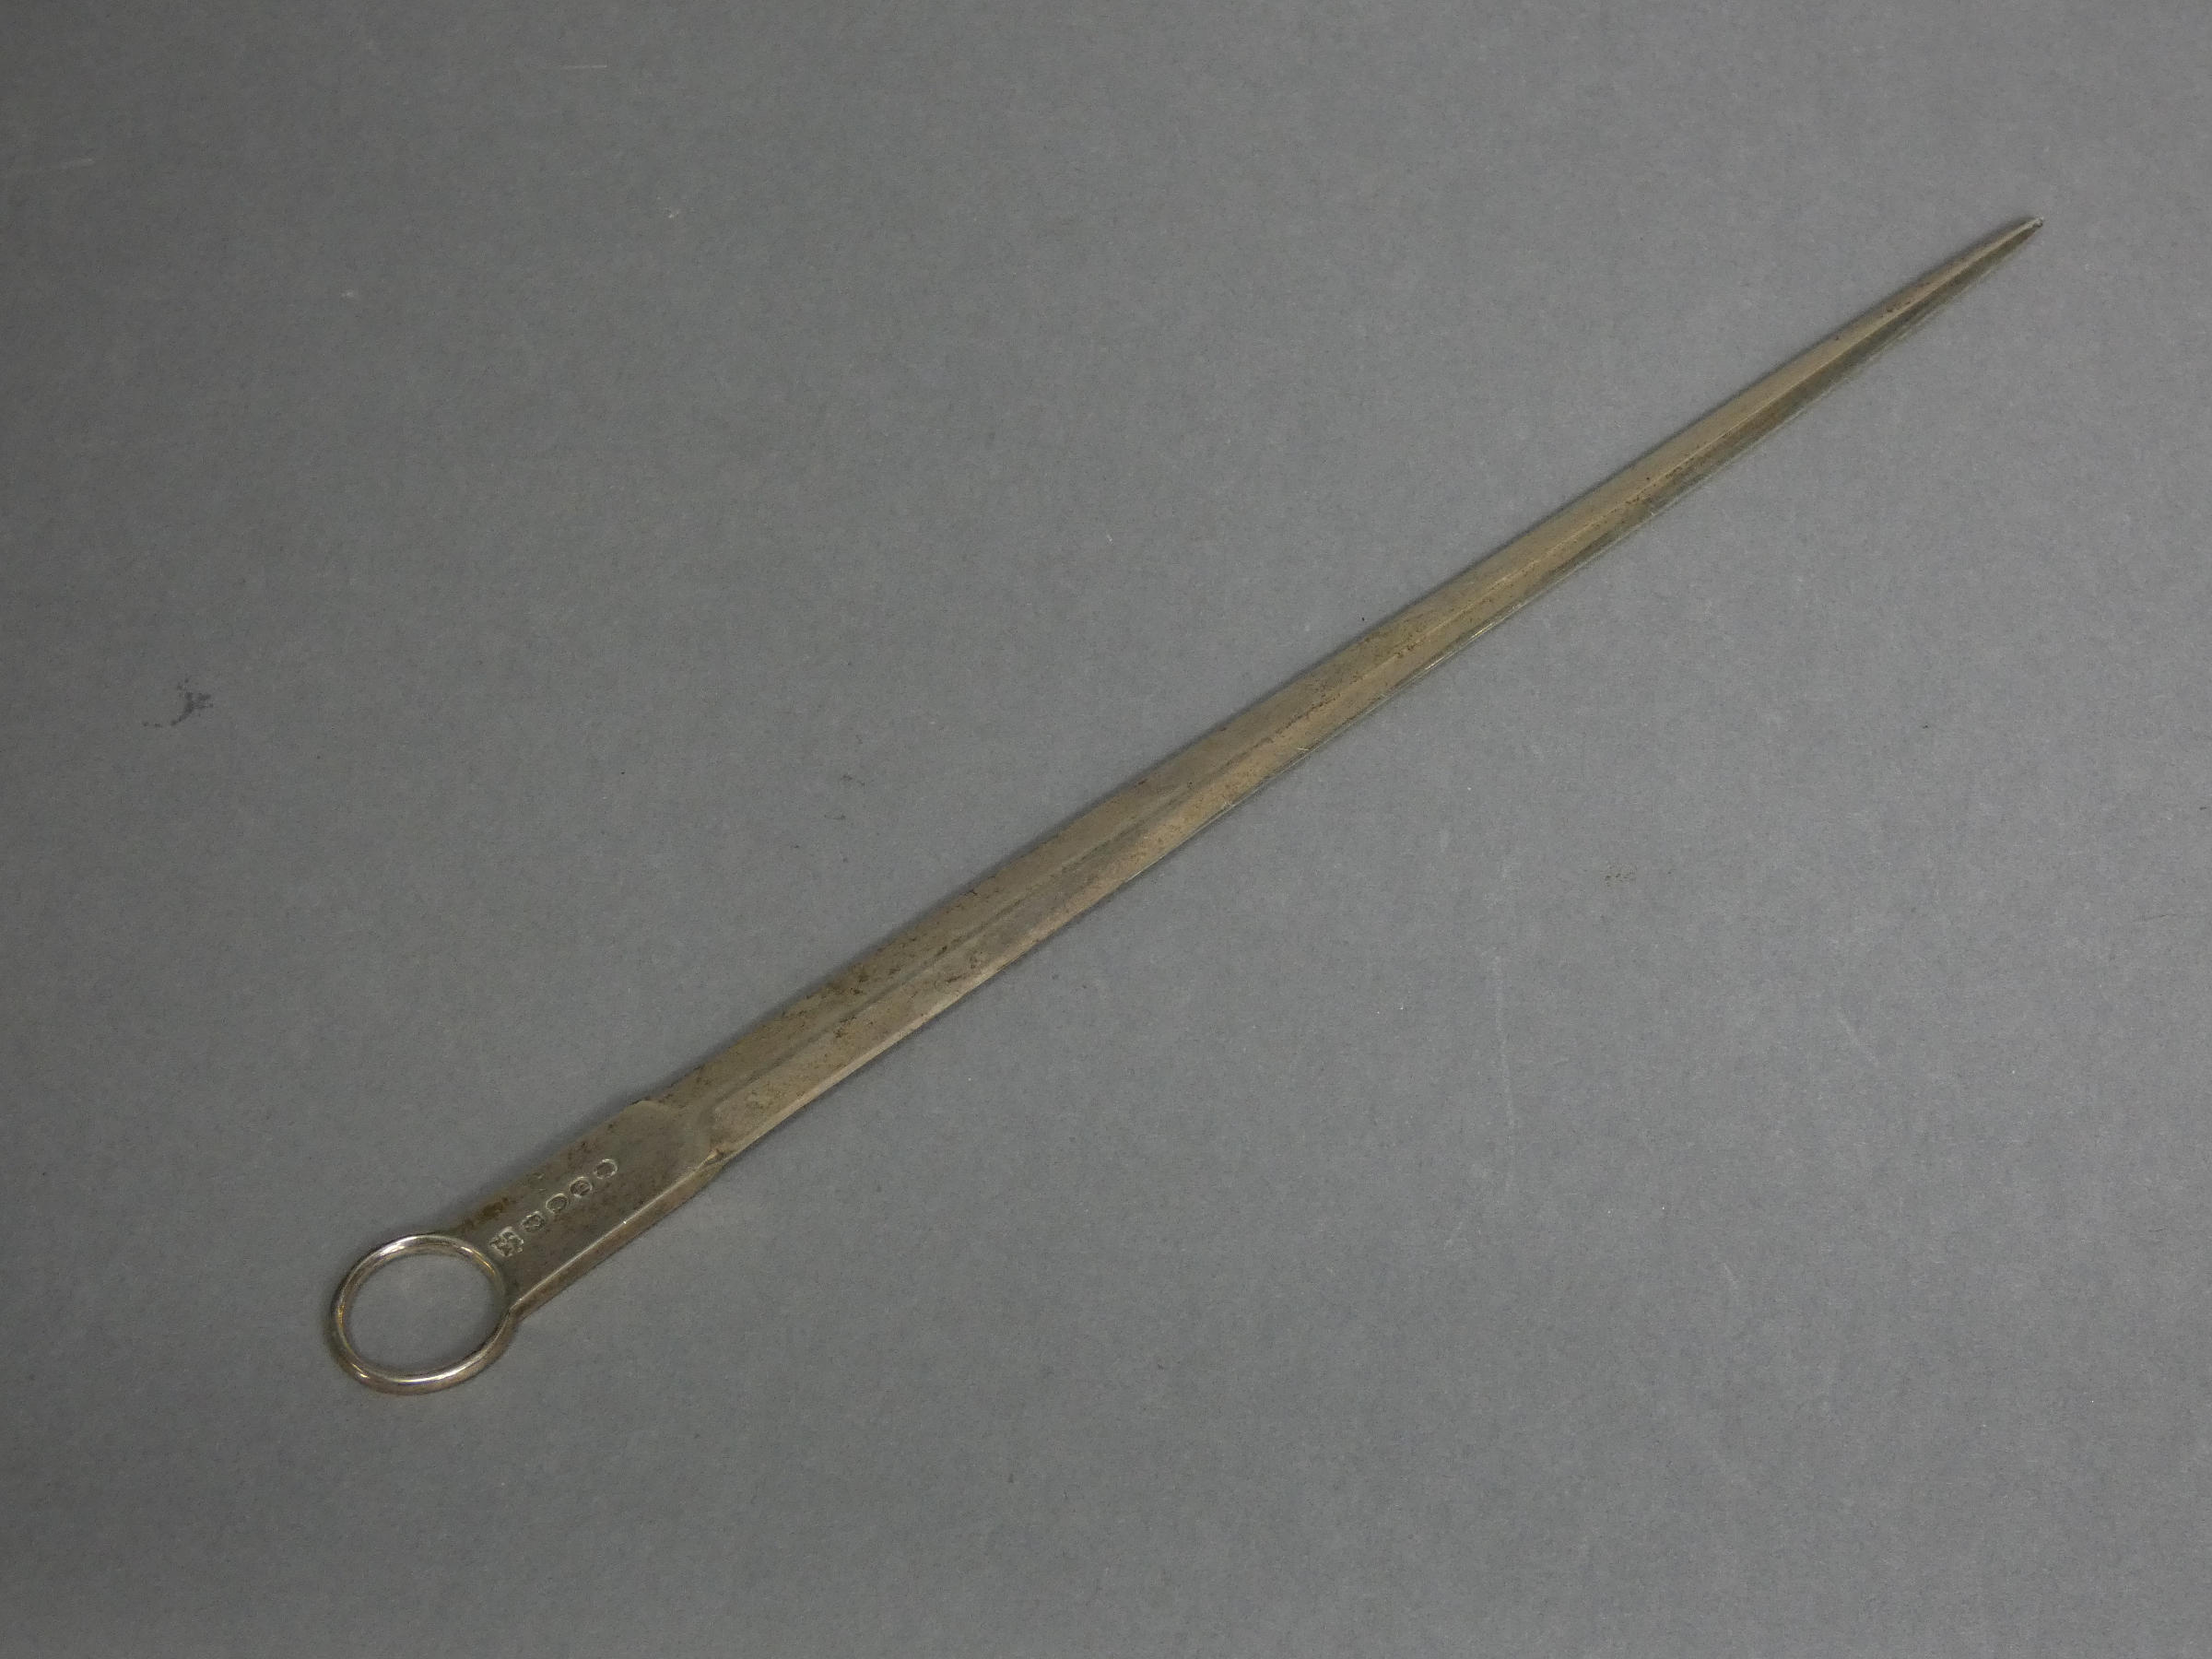 A George III silver meat skewer with plain ring handle, 13” long; London 1817, by Wm. Eley & Wm. - Image 2 of 2